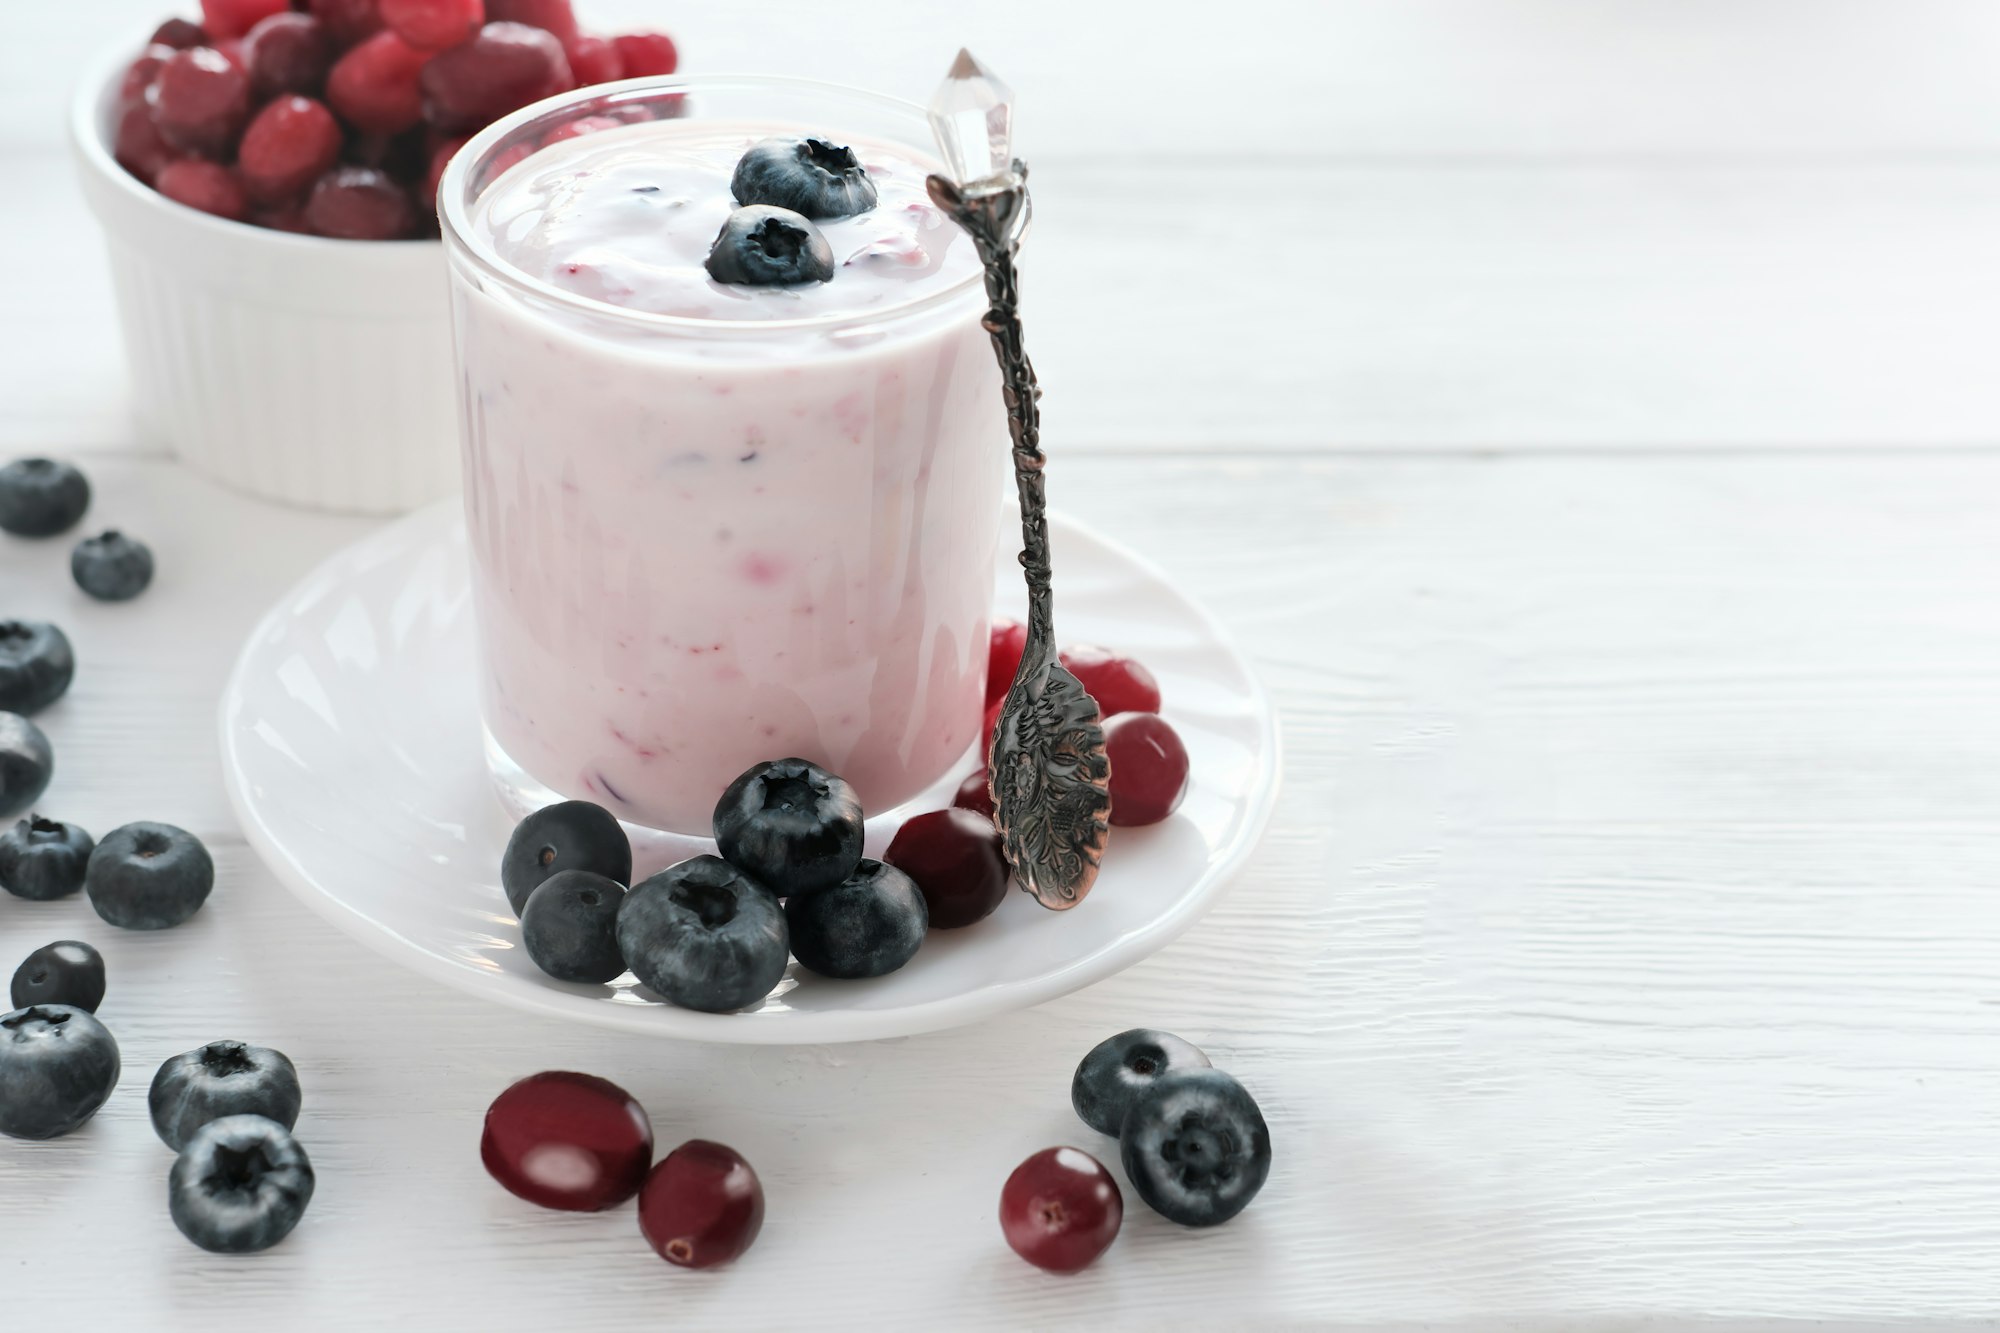 homemade yogurt with berries in a glass. blueberries and cranberry